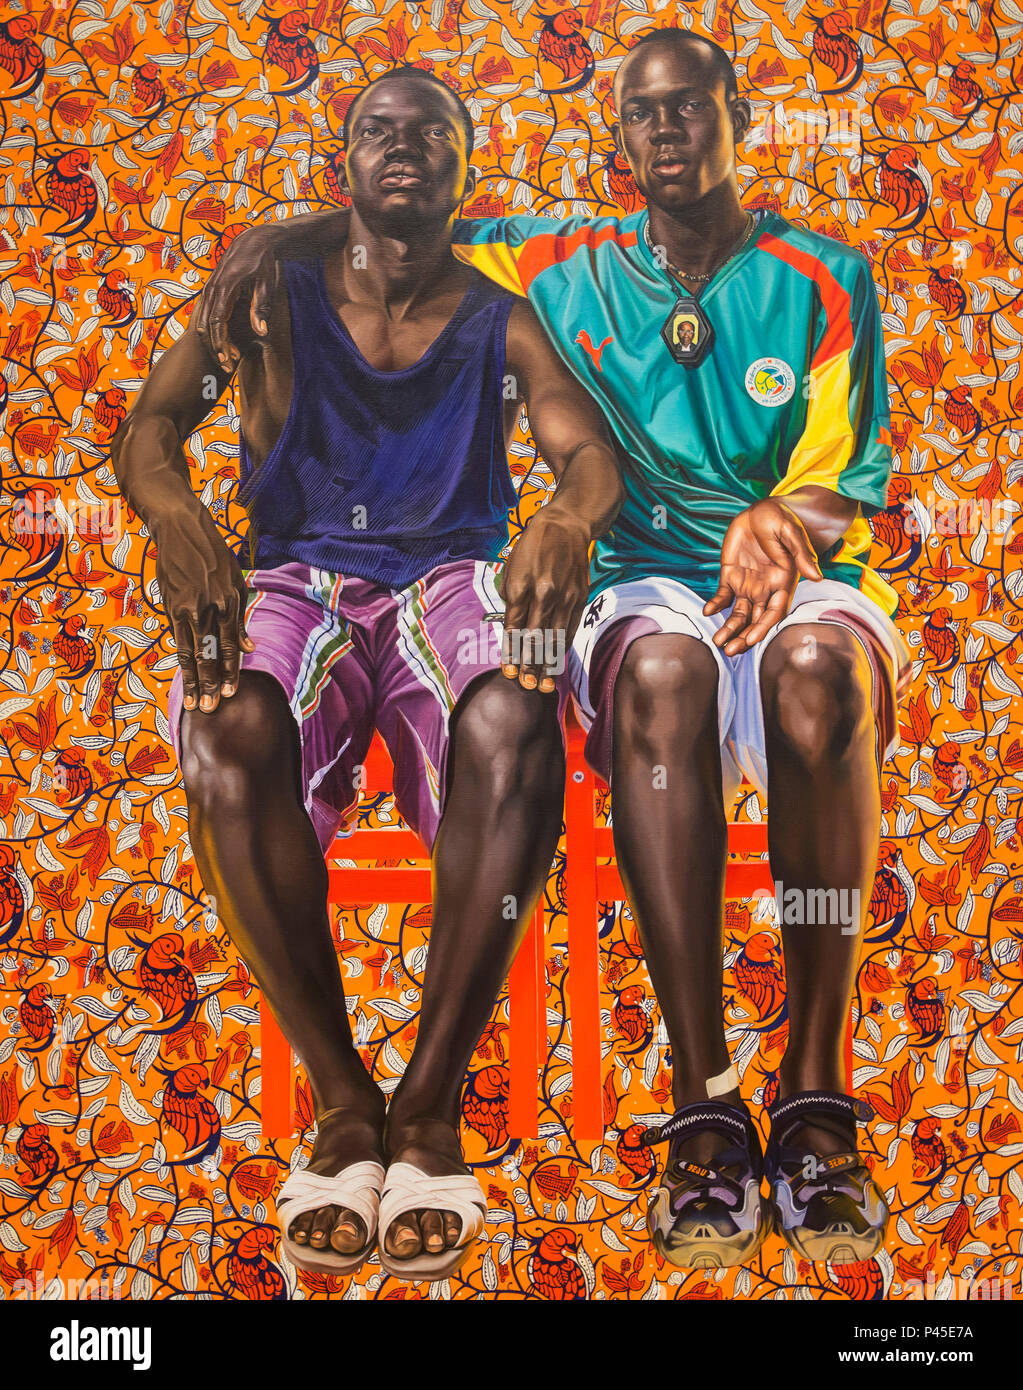 Painting 'Dogon Couple' by contemporary African-American artist Kehinde Wiley is on display. Stock Photo